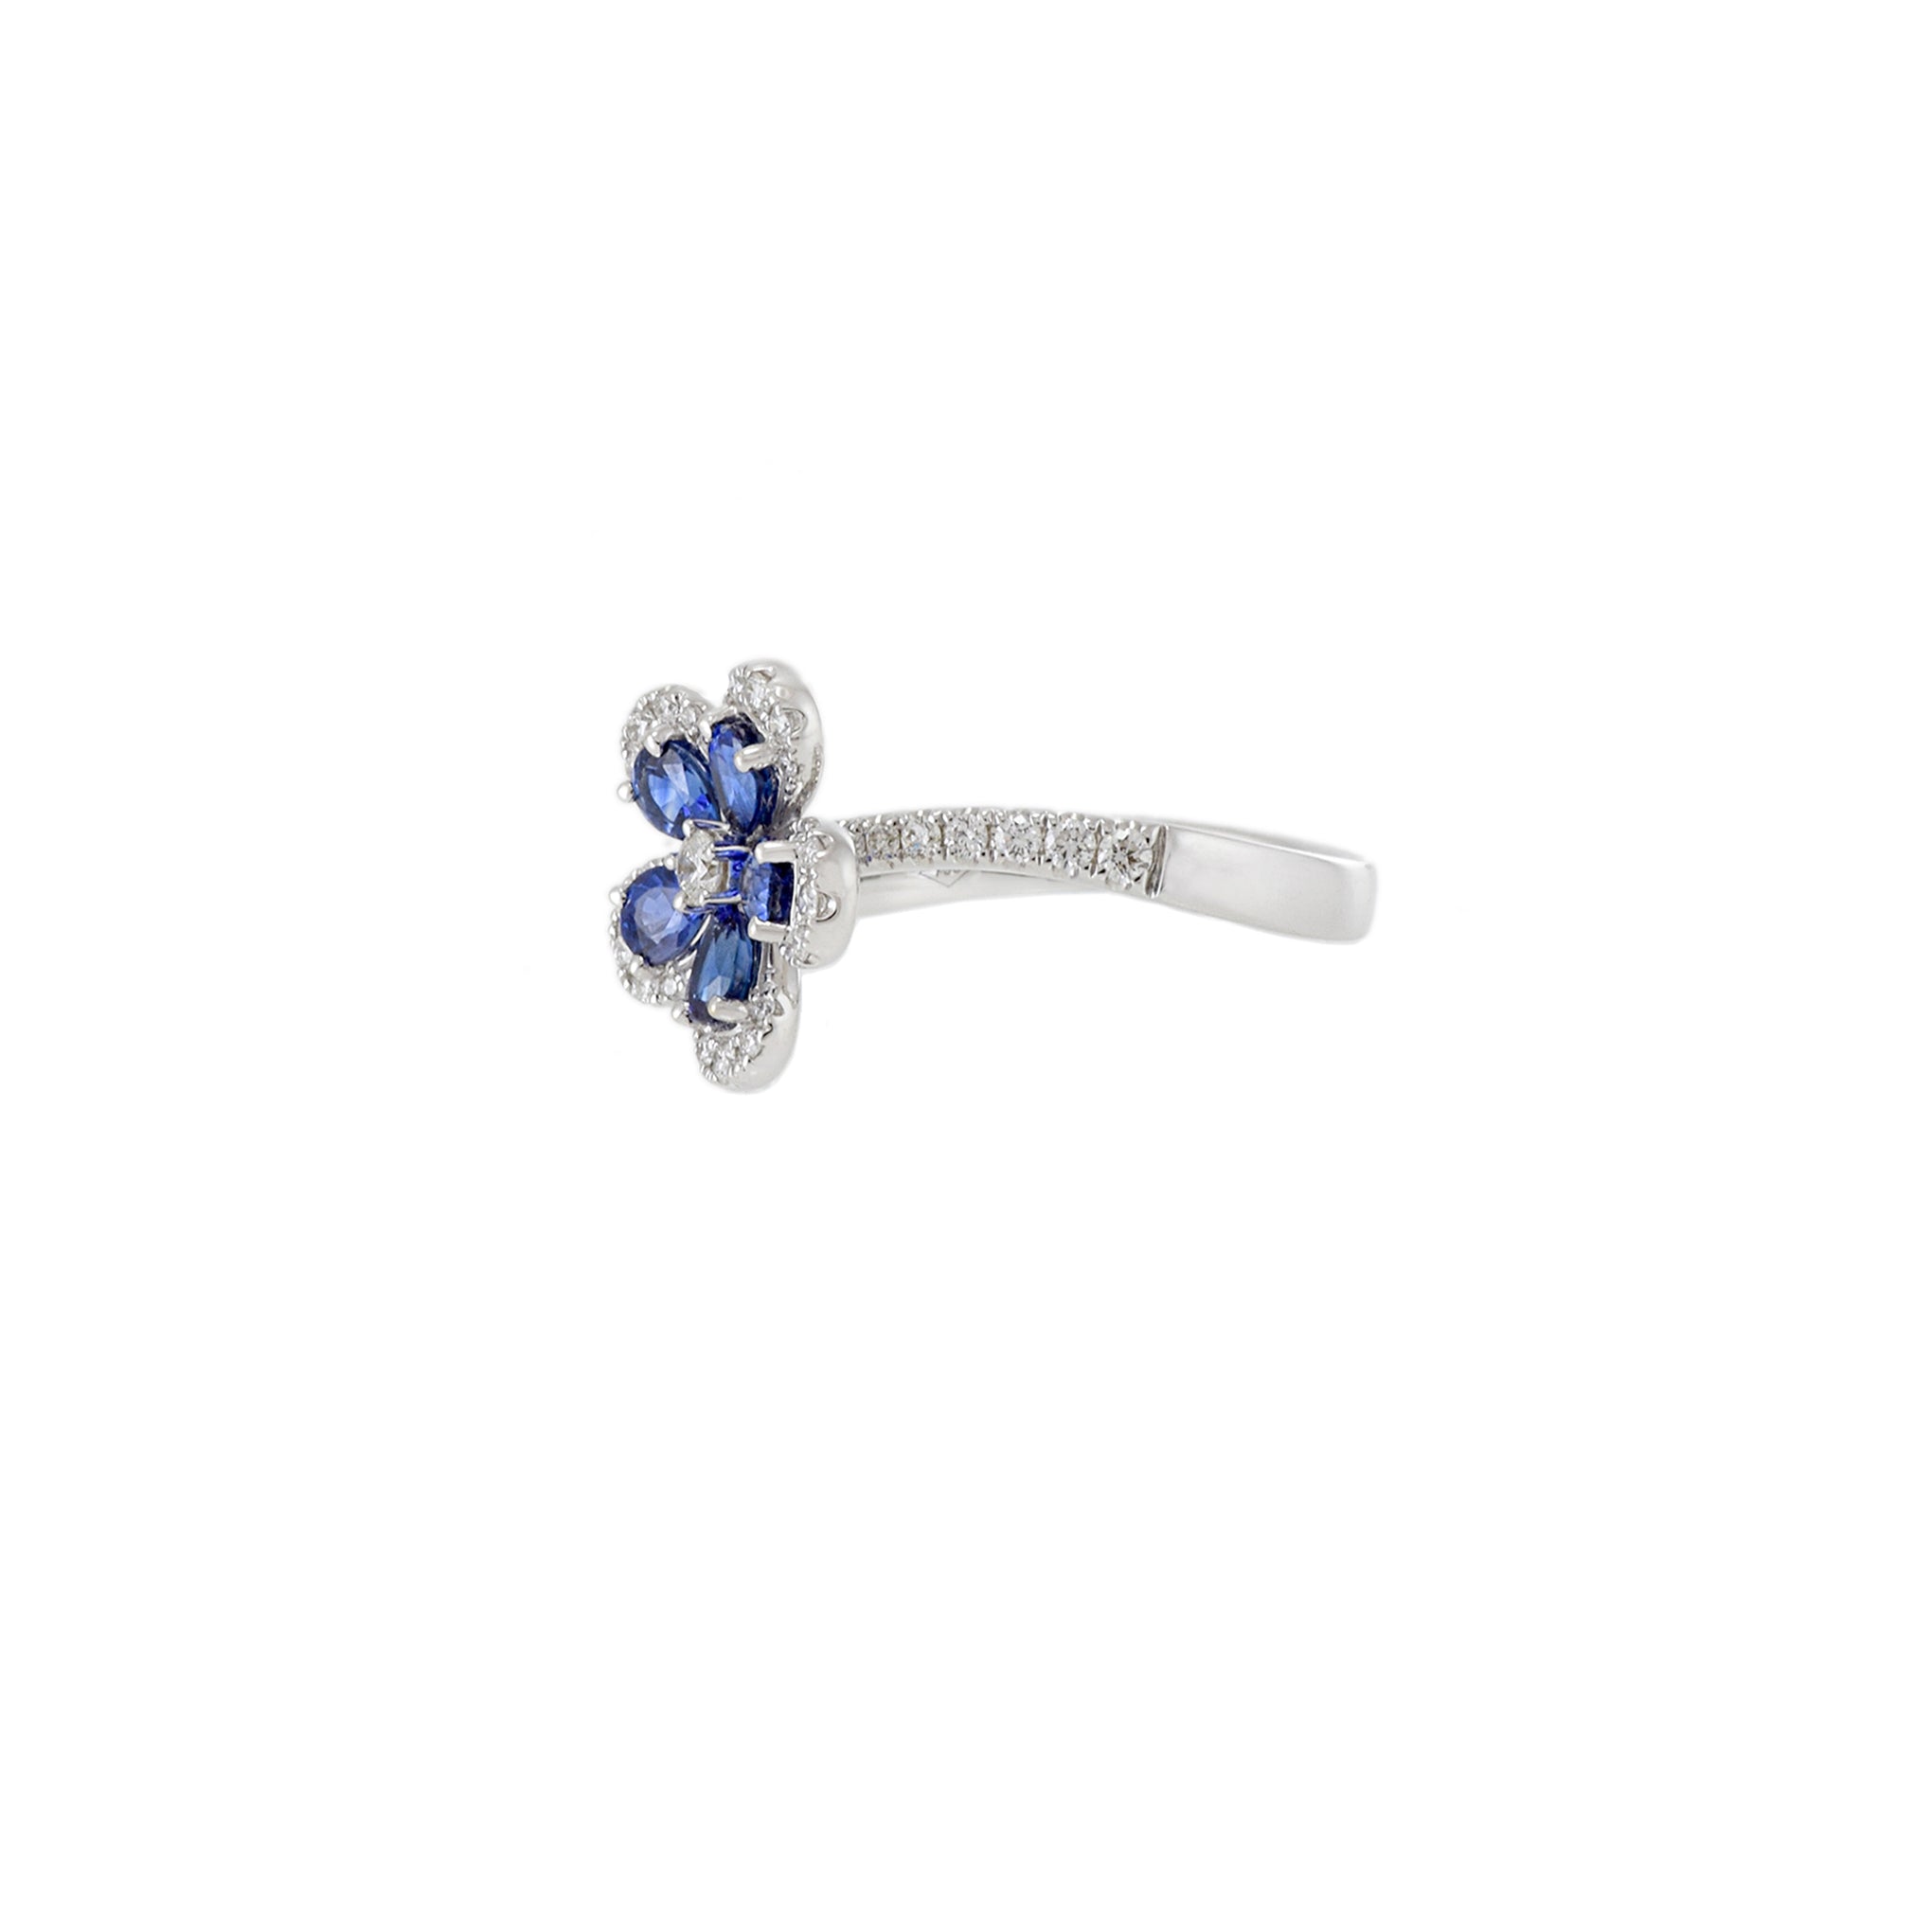 18KT White Gold Diamond And Sapphire Flower Ring